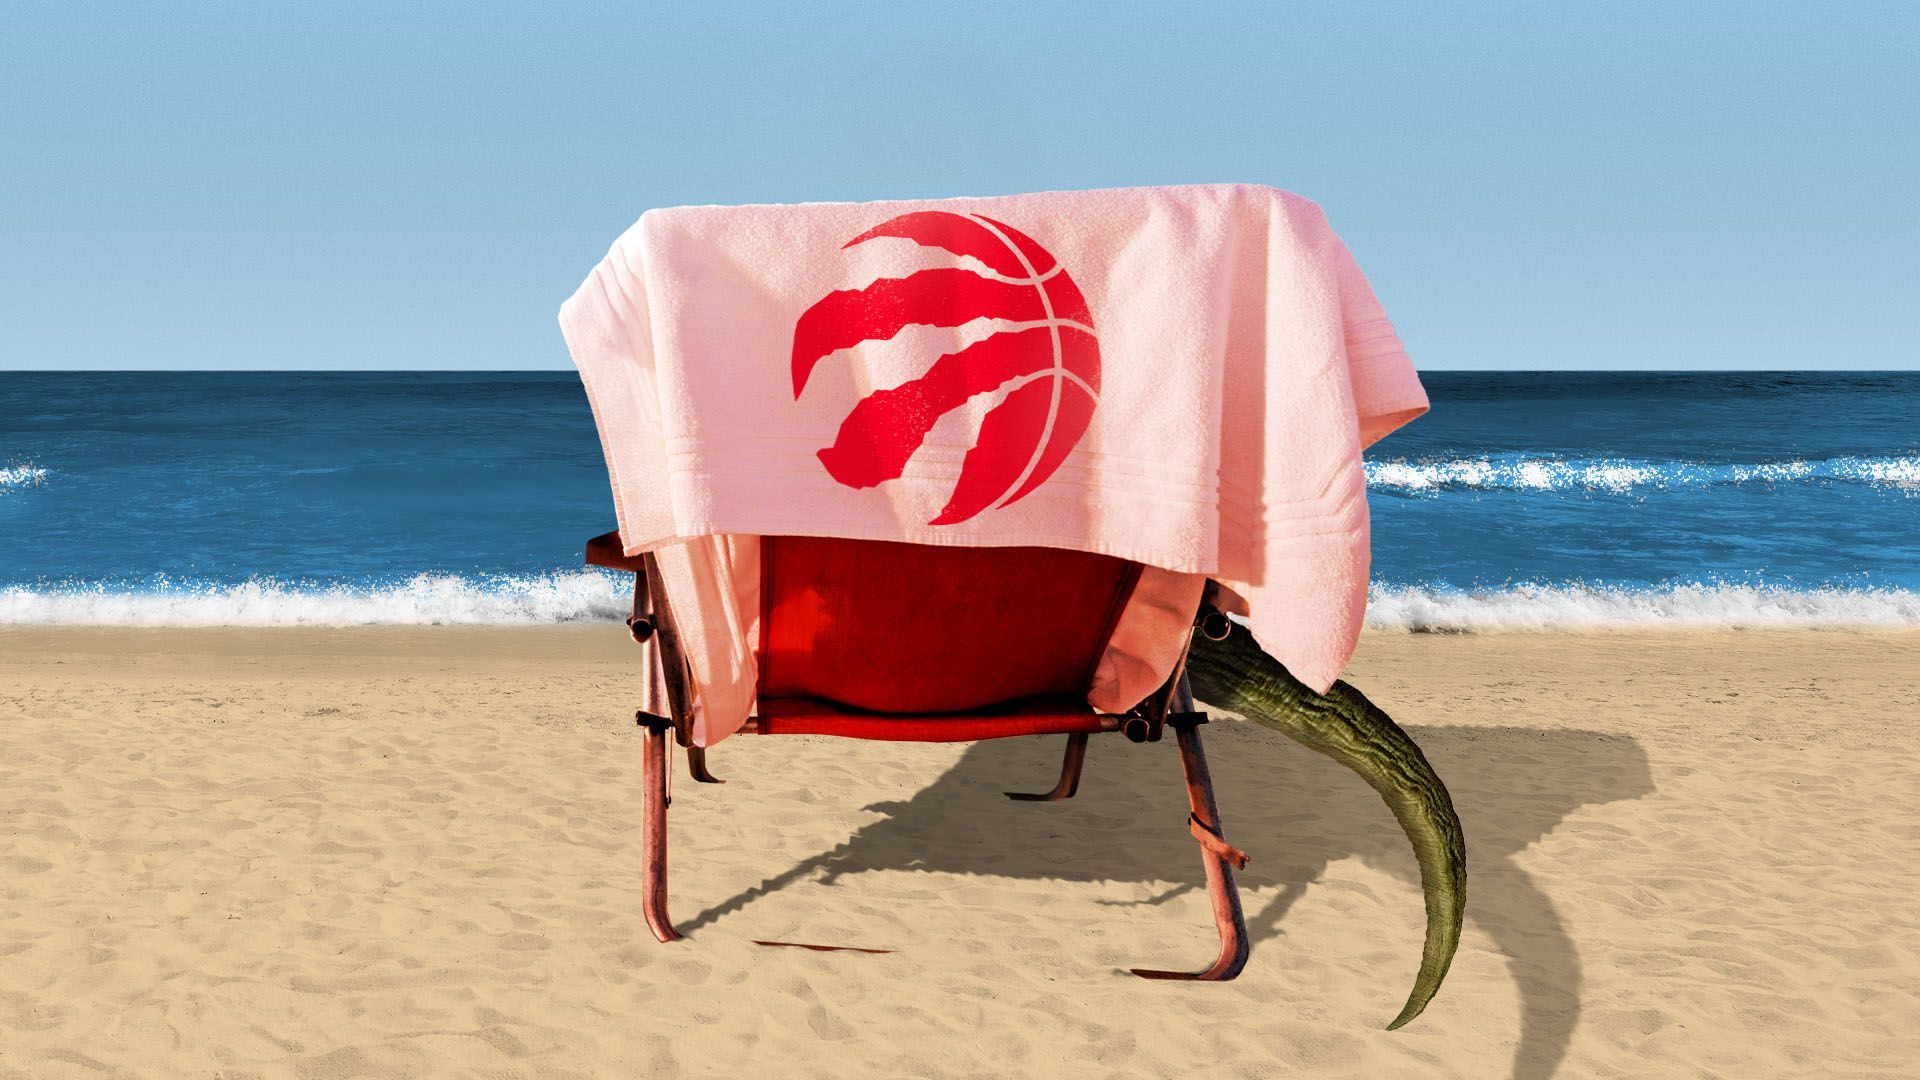 Illustration of a raptor sitting on a beach chair with the Raptor's logo on it